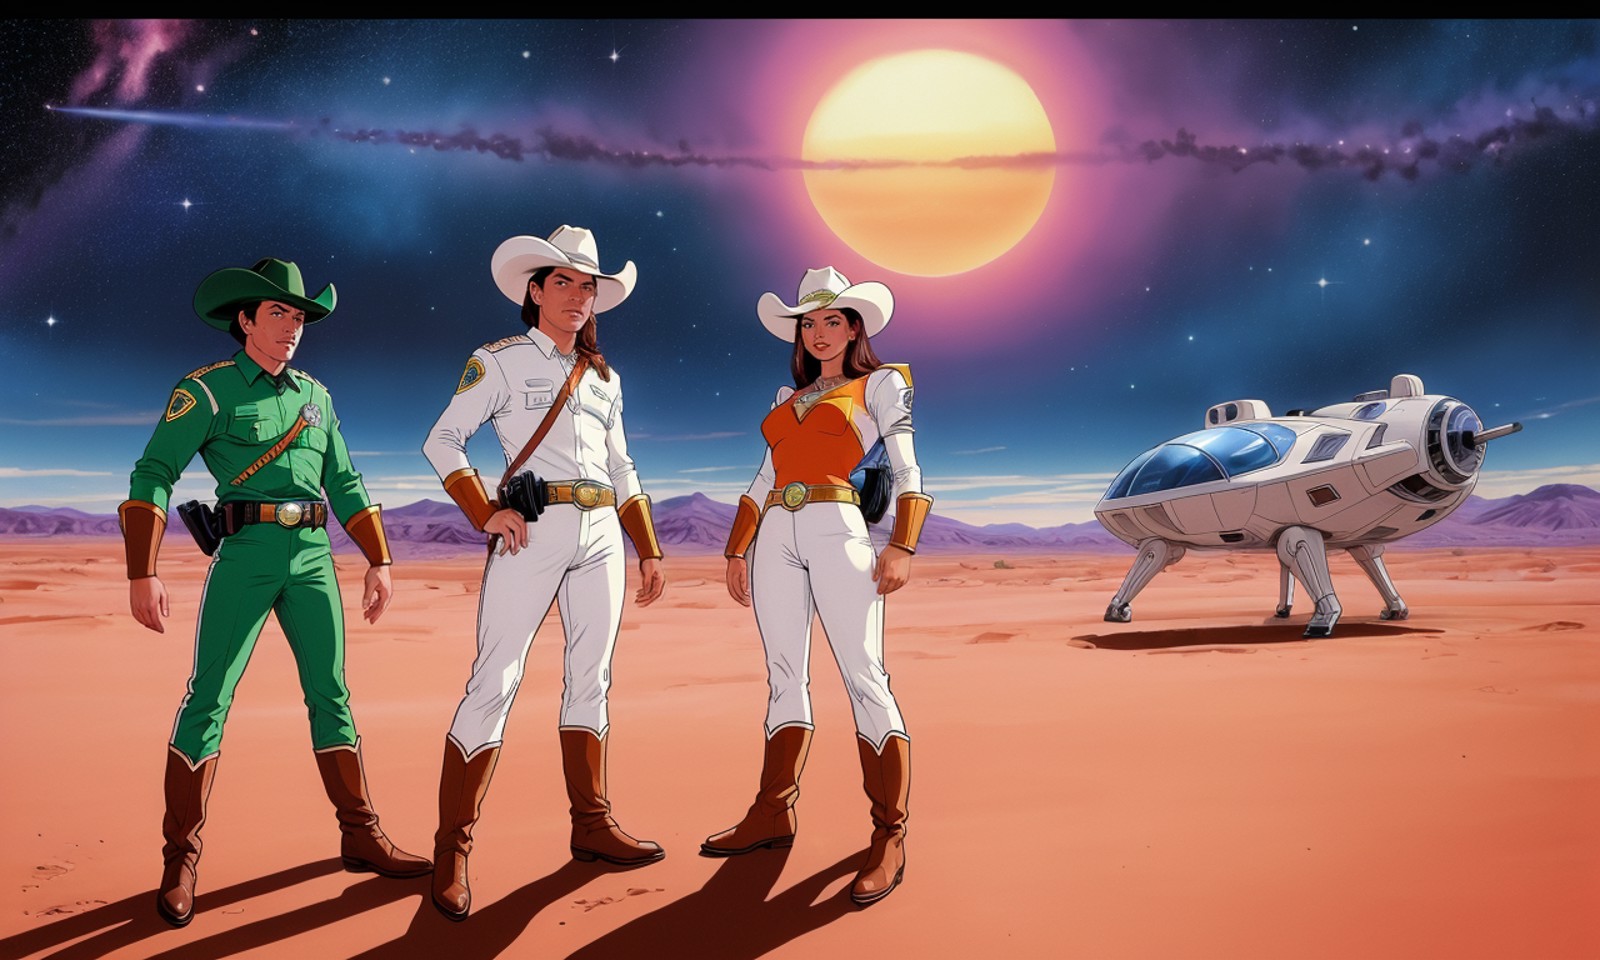 wsma1985, cartoon, vibrant colors, best quality, masterpiece, group of people, cowboys, sci-fi western, cowboy hat, desert...